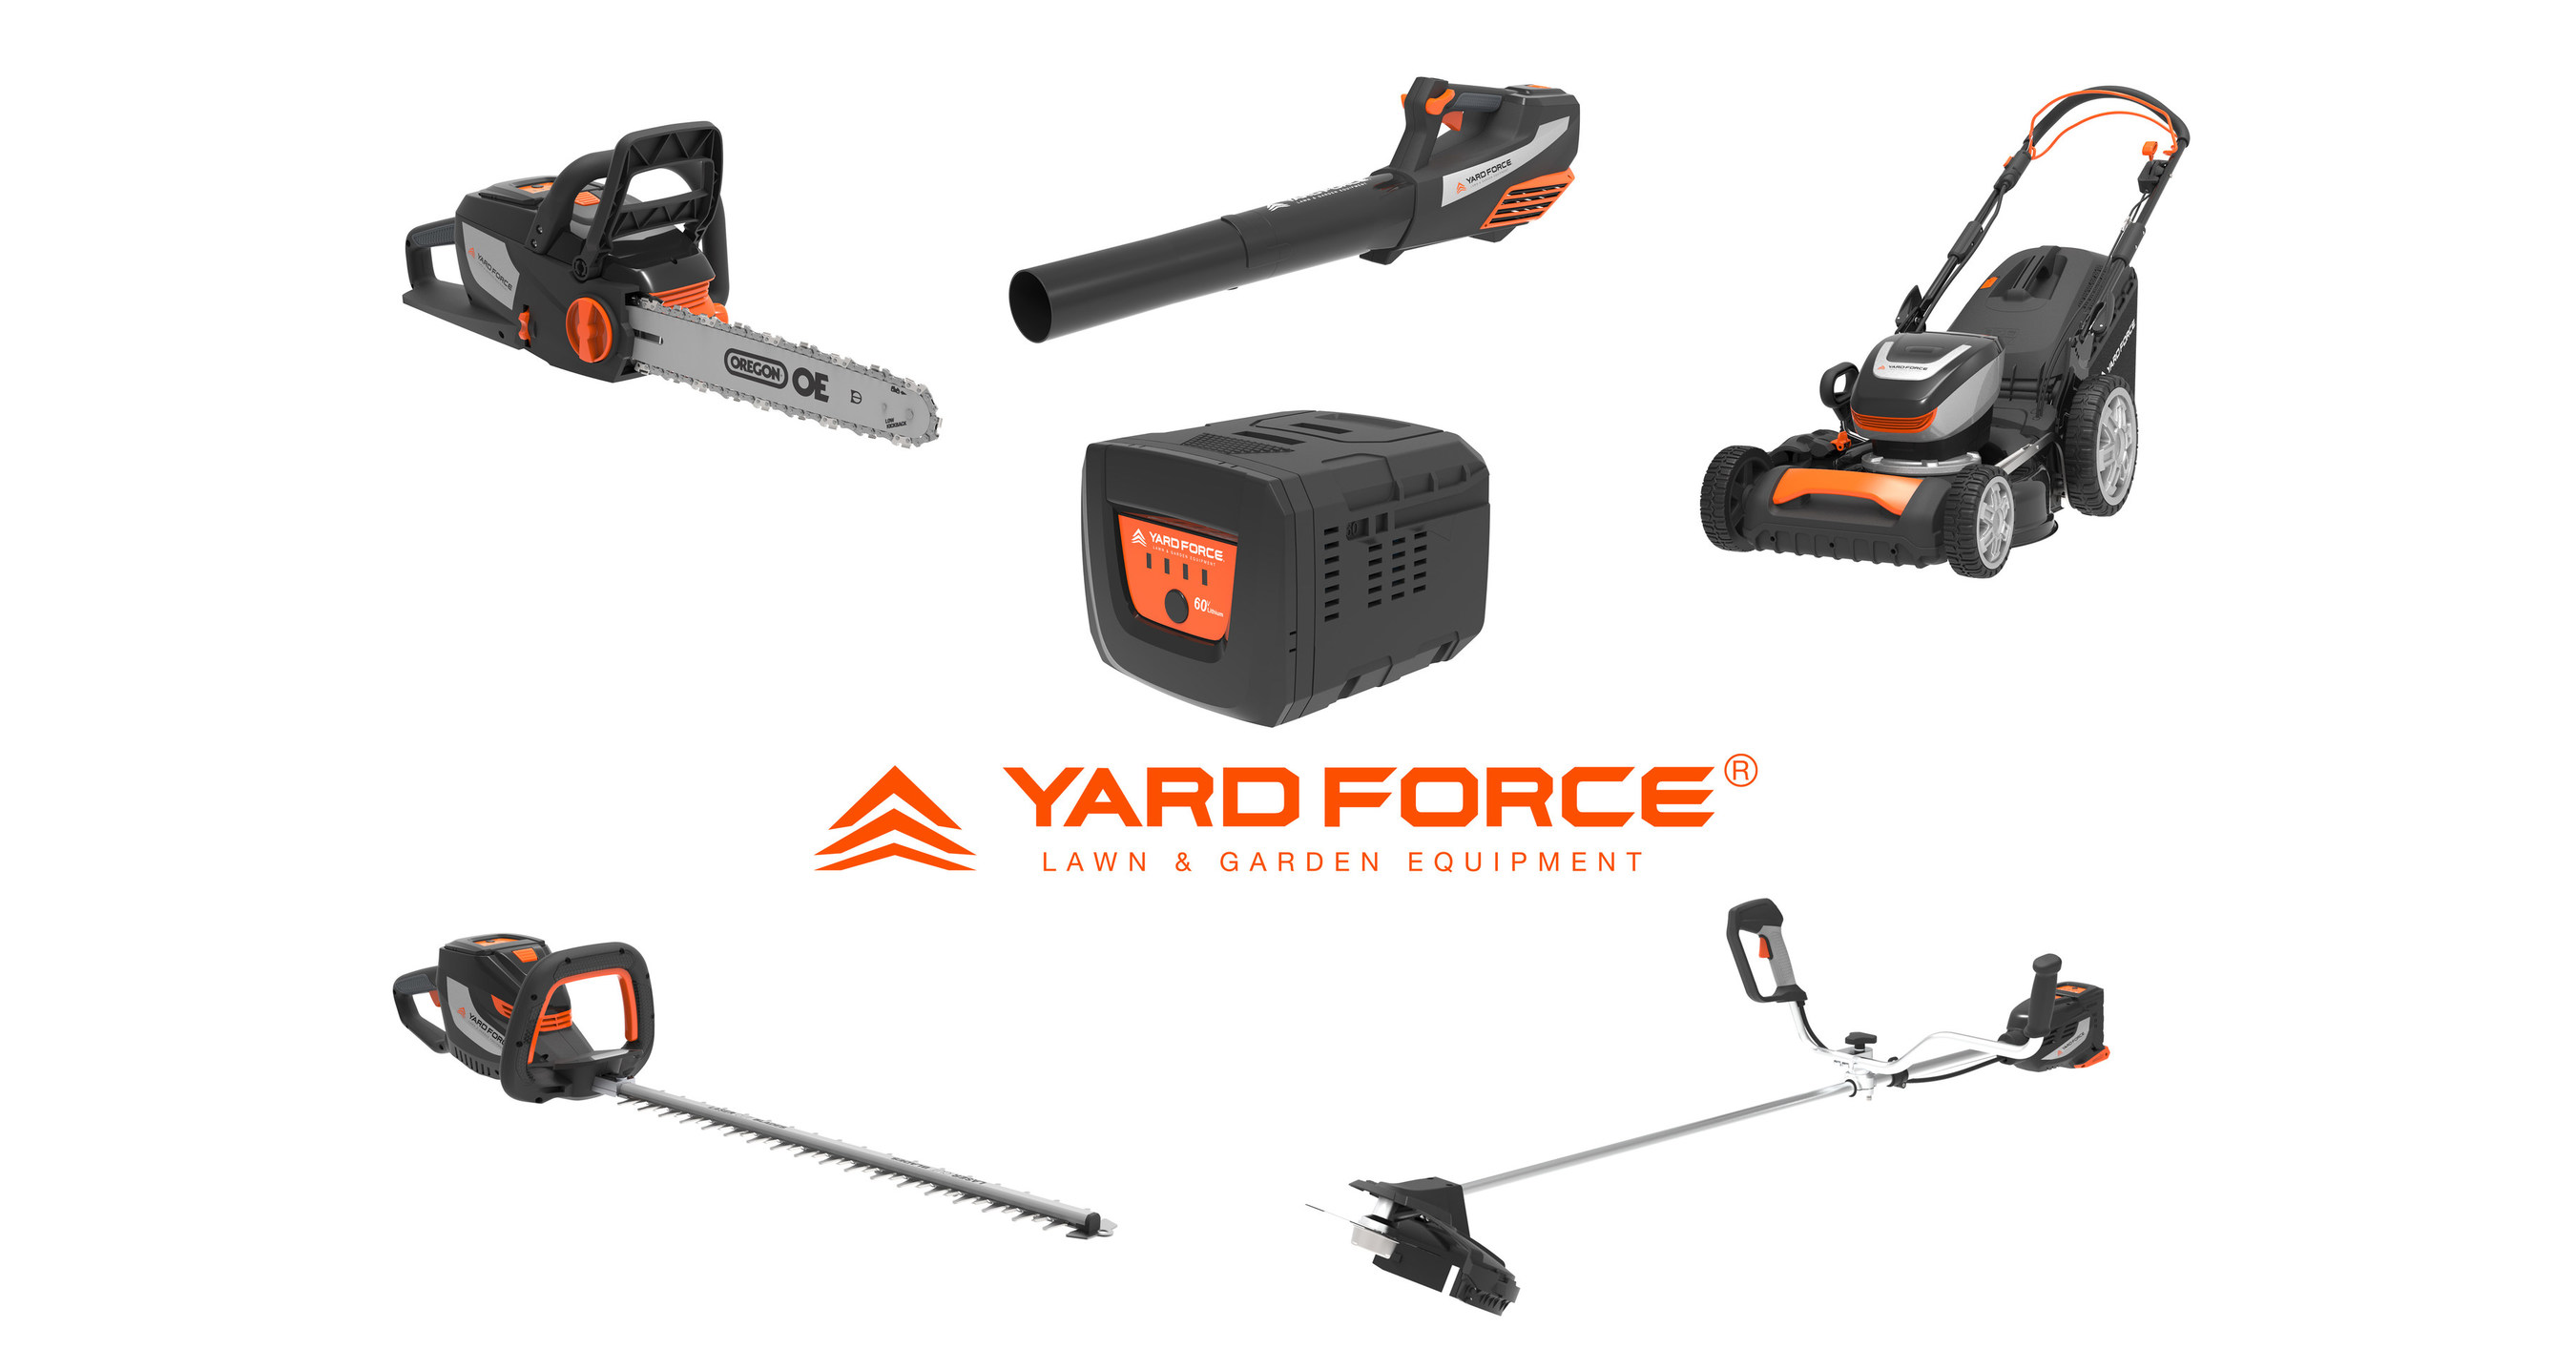 Yardforce 60v Blower with 2.5 Ah Battery and Charger